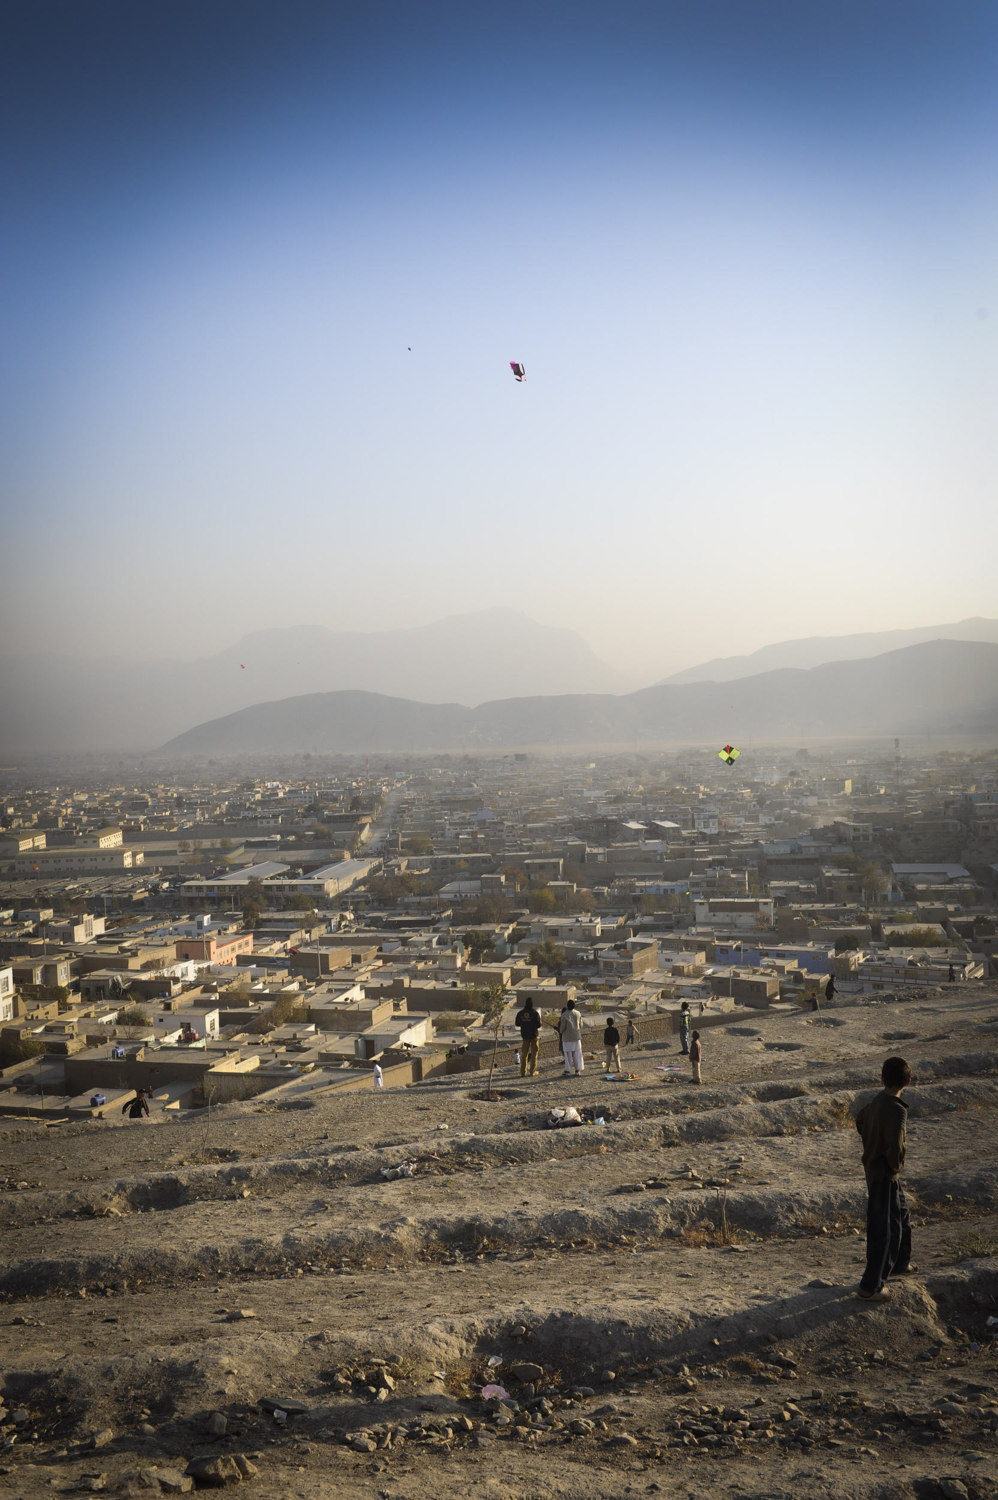  Afghans gather on a Friday on Nadir Shah Hill, or Kite Hill- to fly paper kites and battle others in a traditional match. When a Kite is cut children with long brooms have to catch the kites before their prize blows away. Kite flying is a popular re